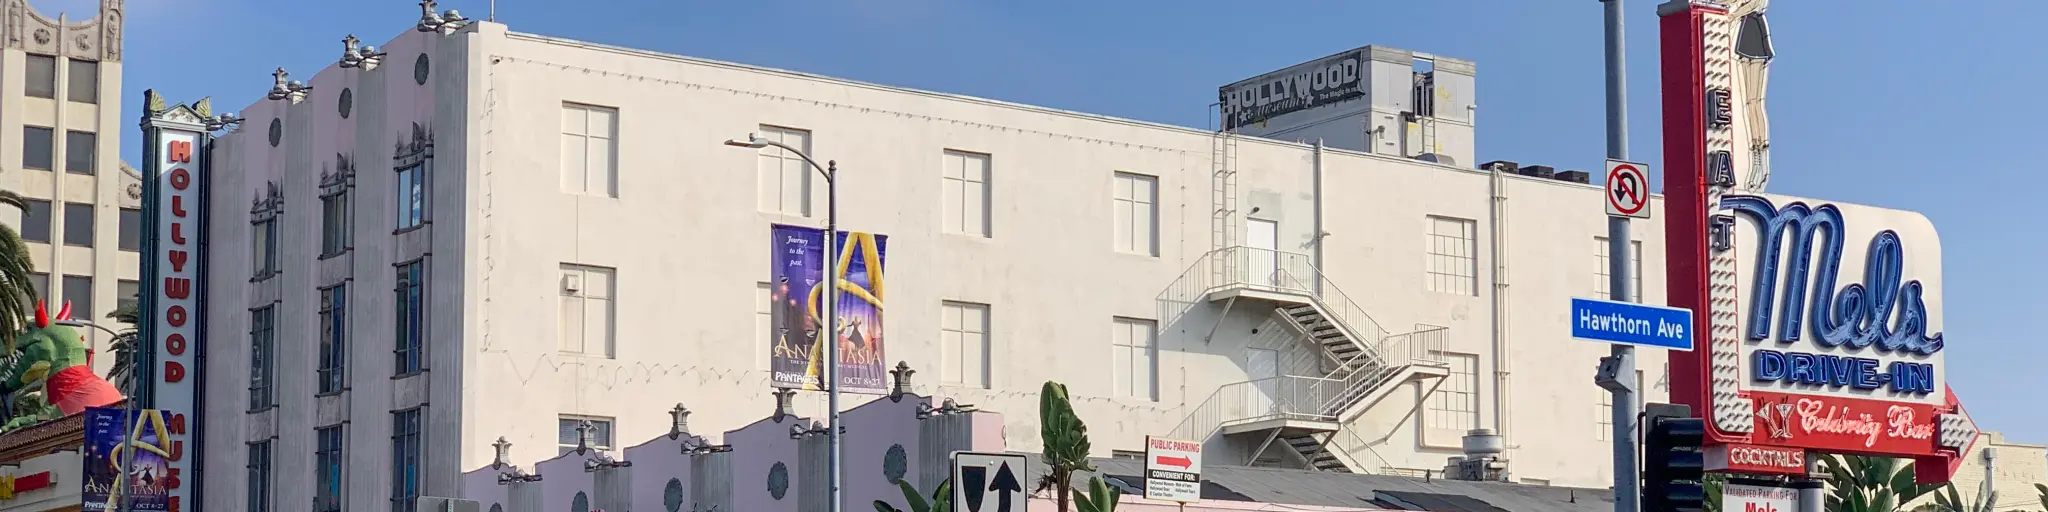 Exterior of the Hollywood Museum with cars and pedestrians on a sunny day